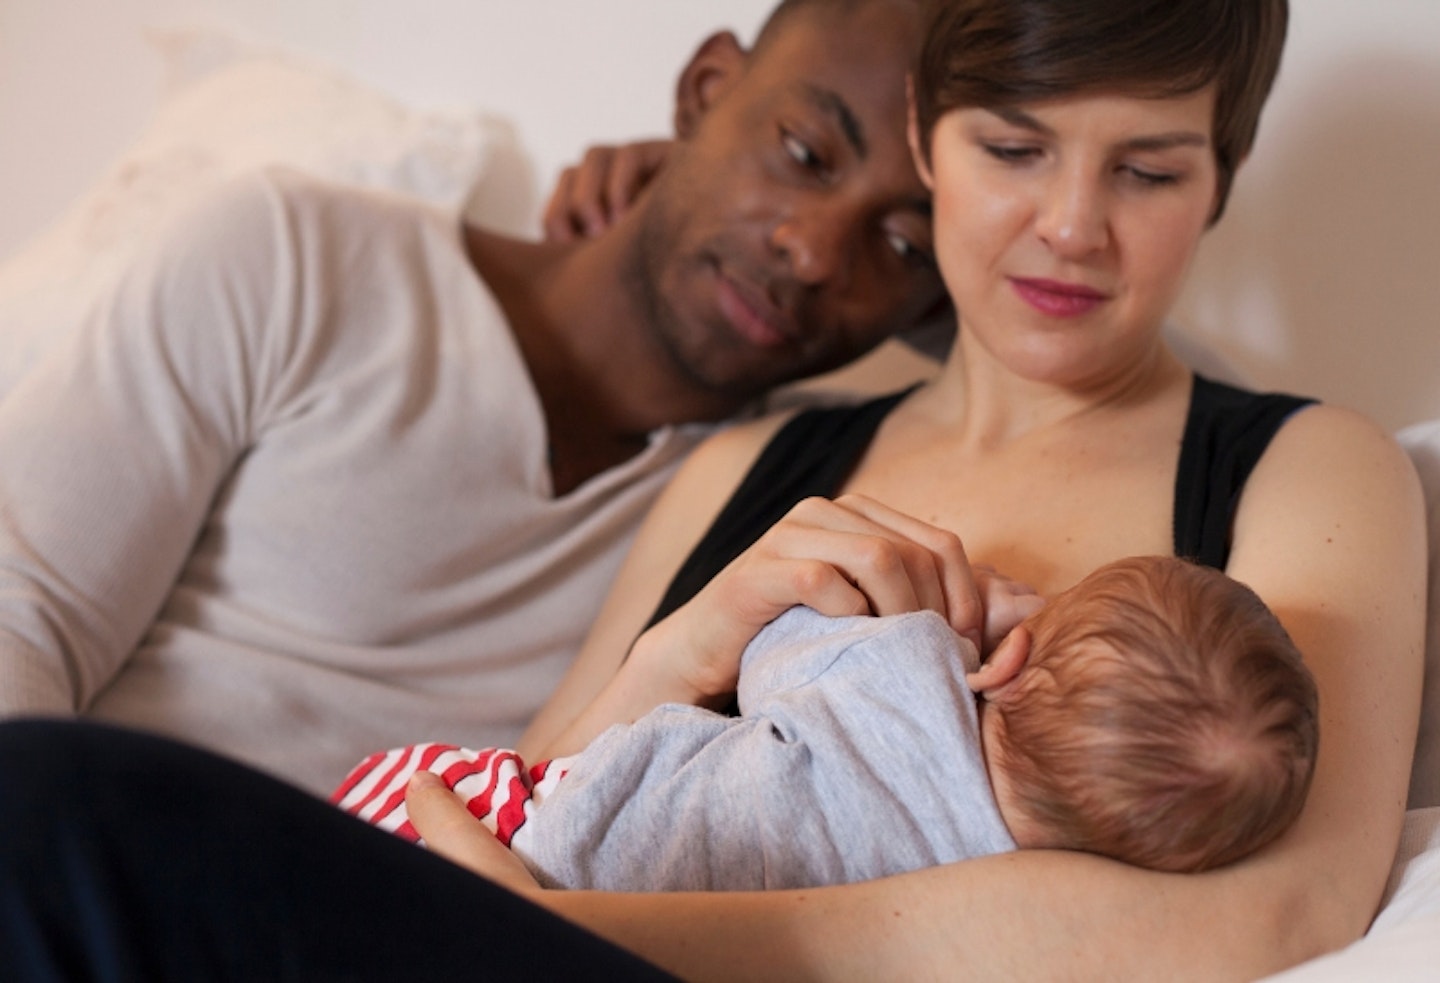 When and How to Stop Breastfeeding A Baby